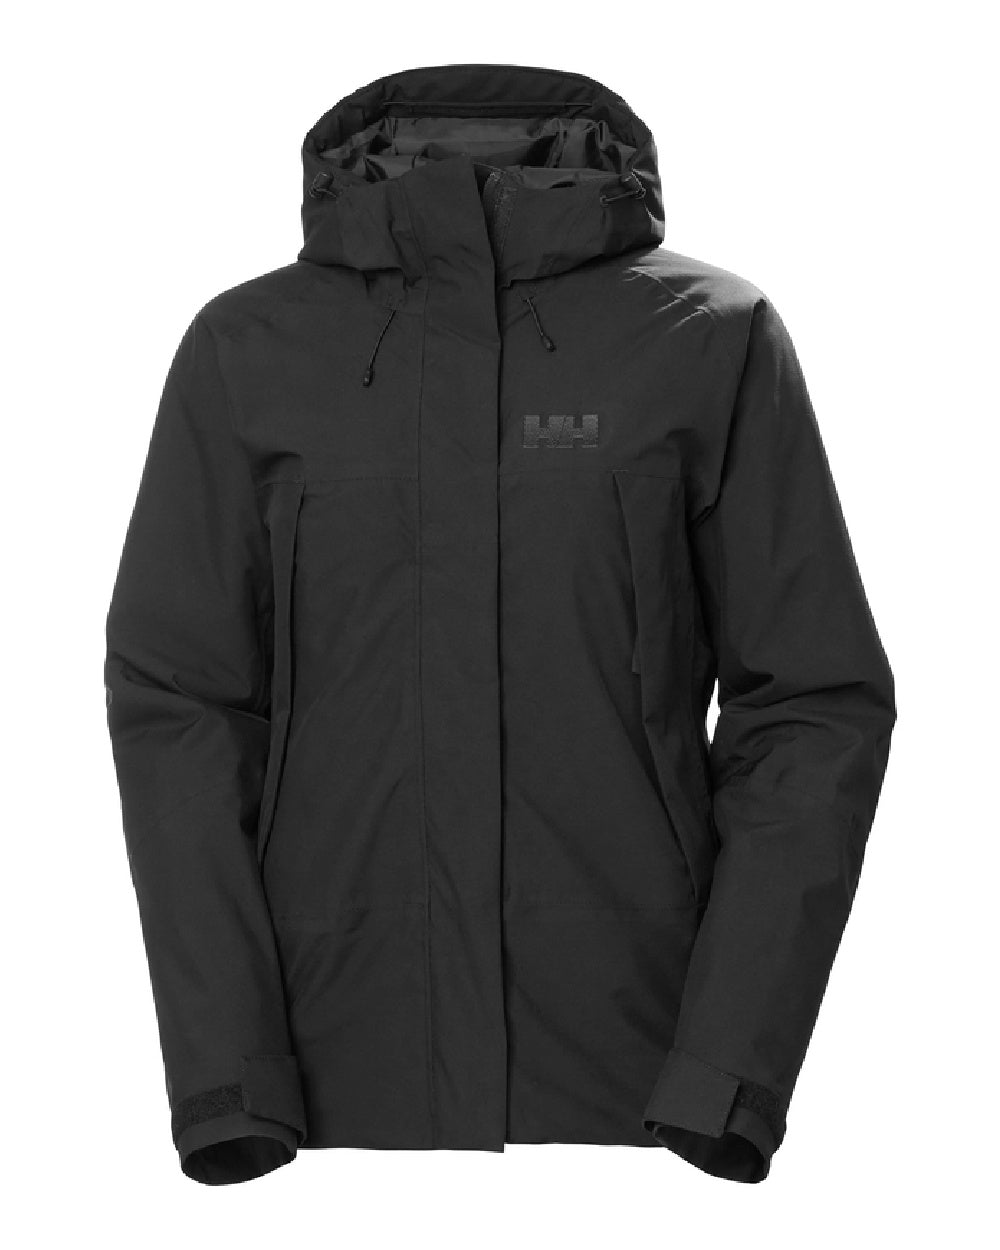 Helly Hanesn Womens Banff Insulated Shell Jacket in Black 